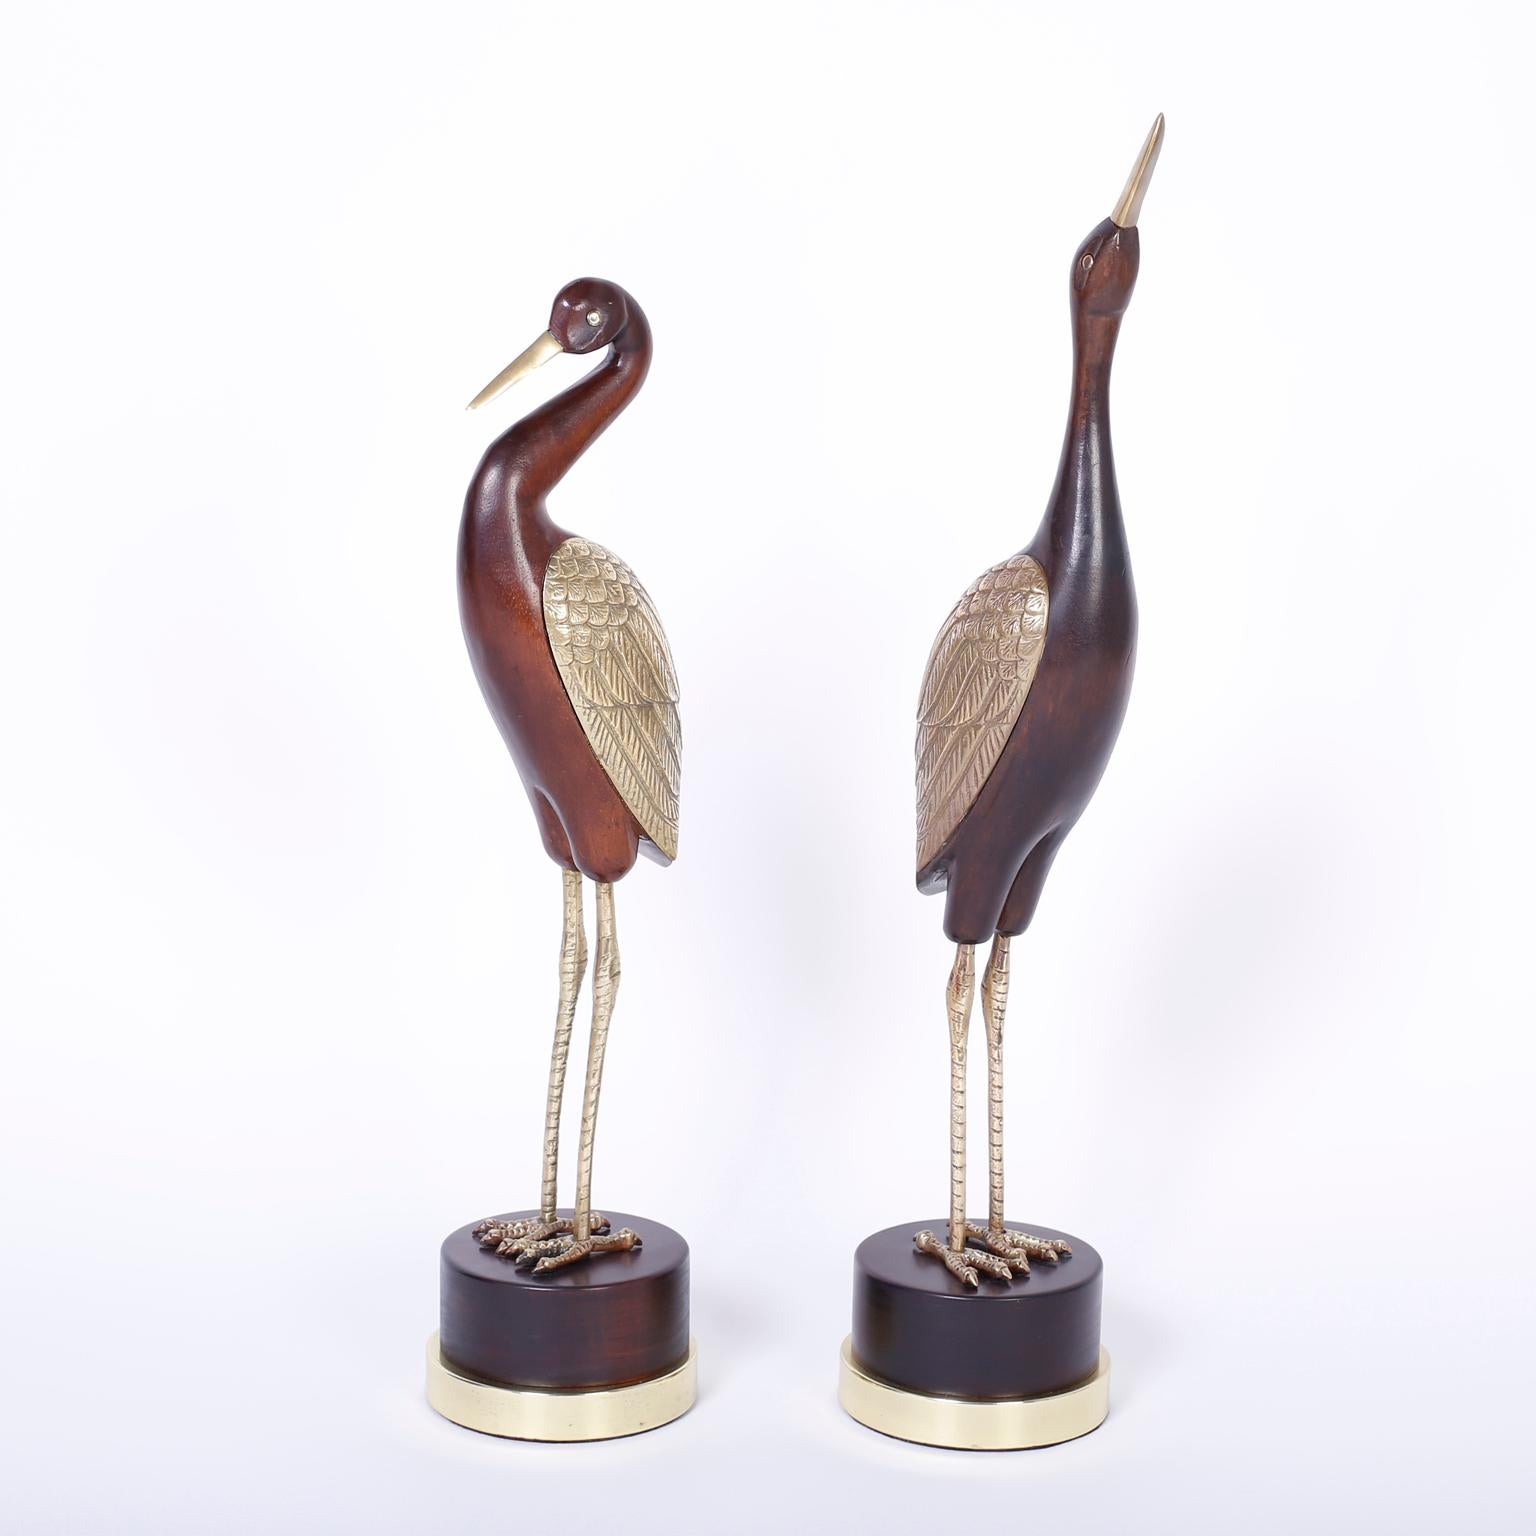 Chic pair of Mid-Century Modern stylized birds crafted in wood and brass each with its own alluring form and personality that are buffed, polished and ready for their new home.